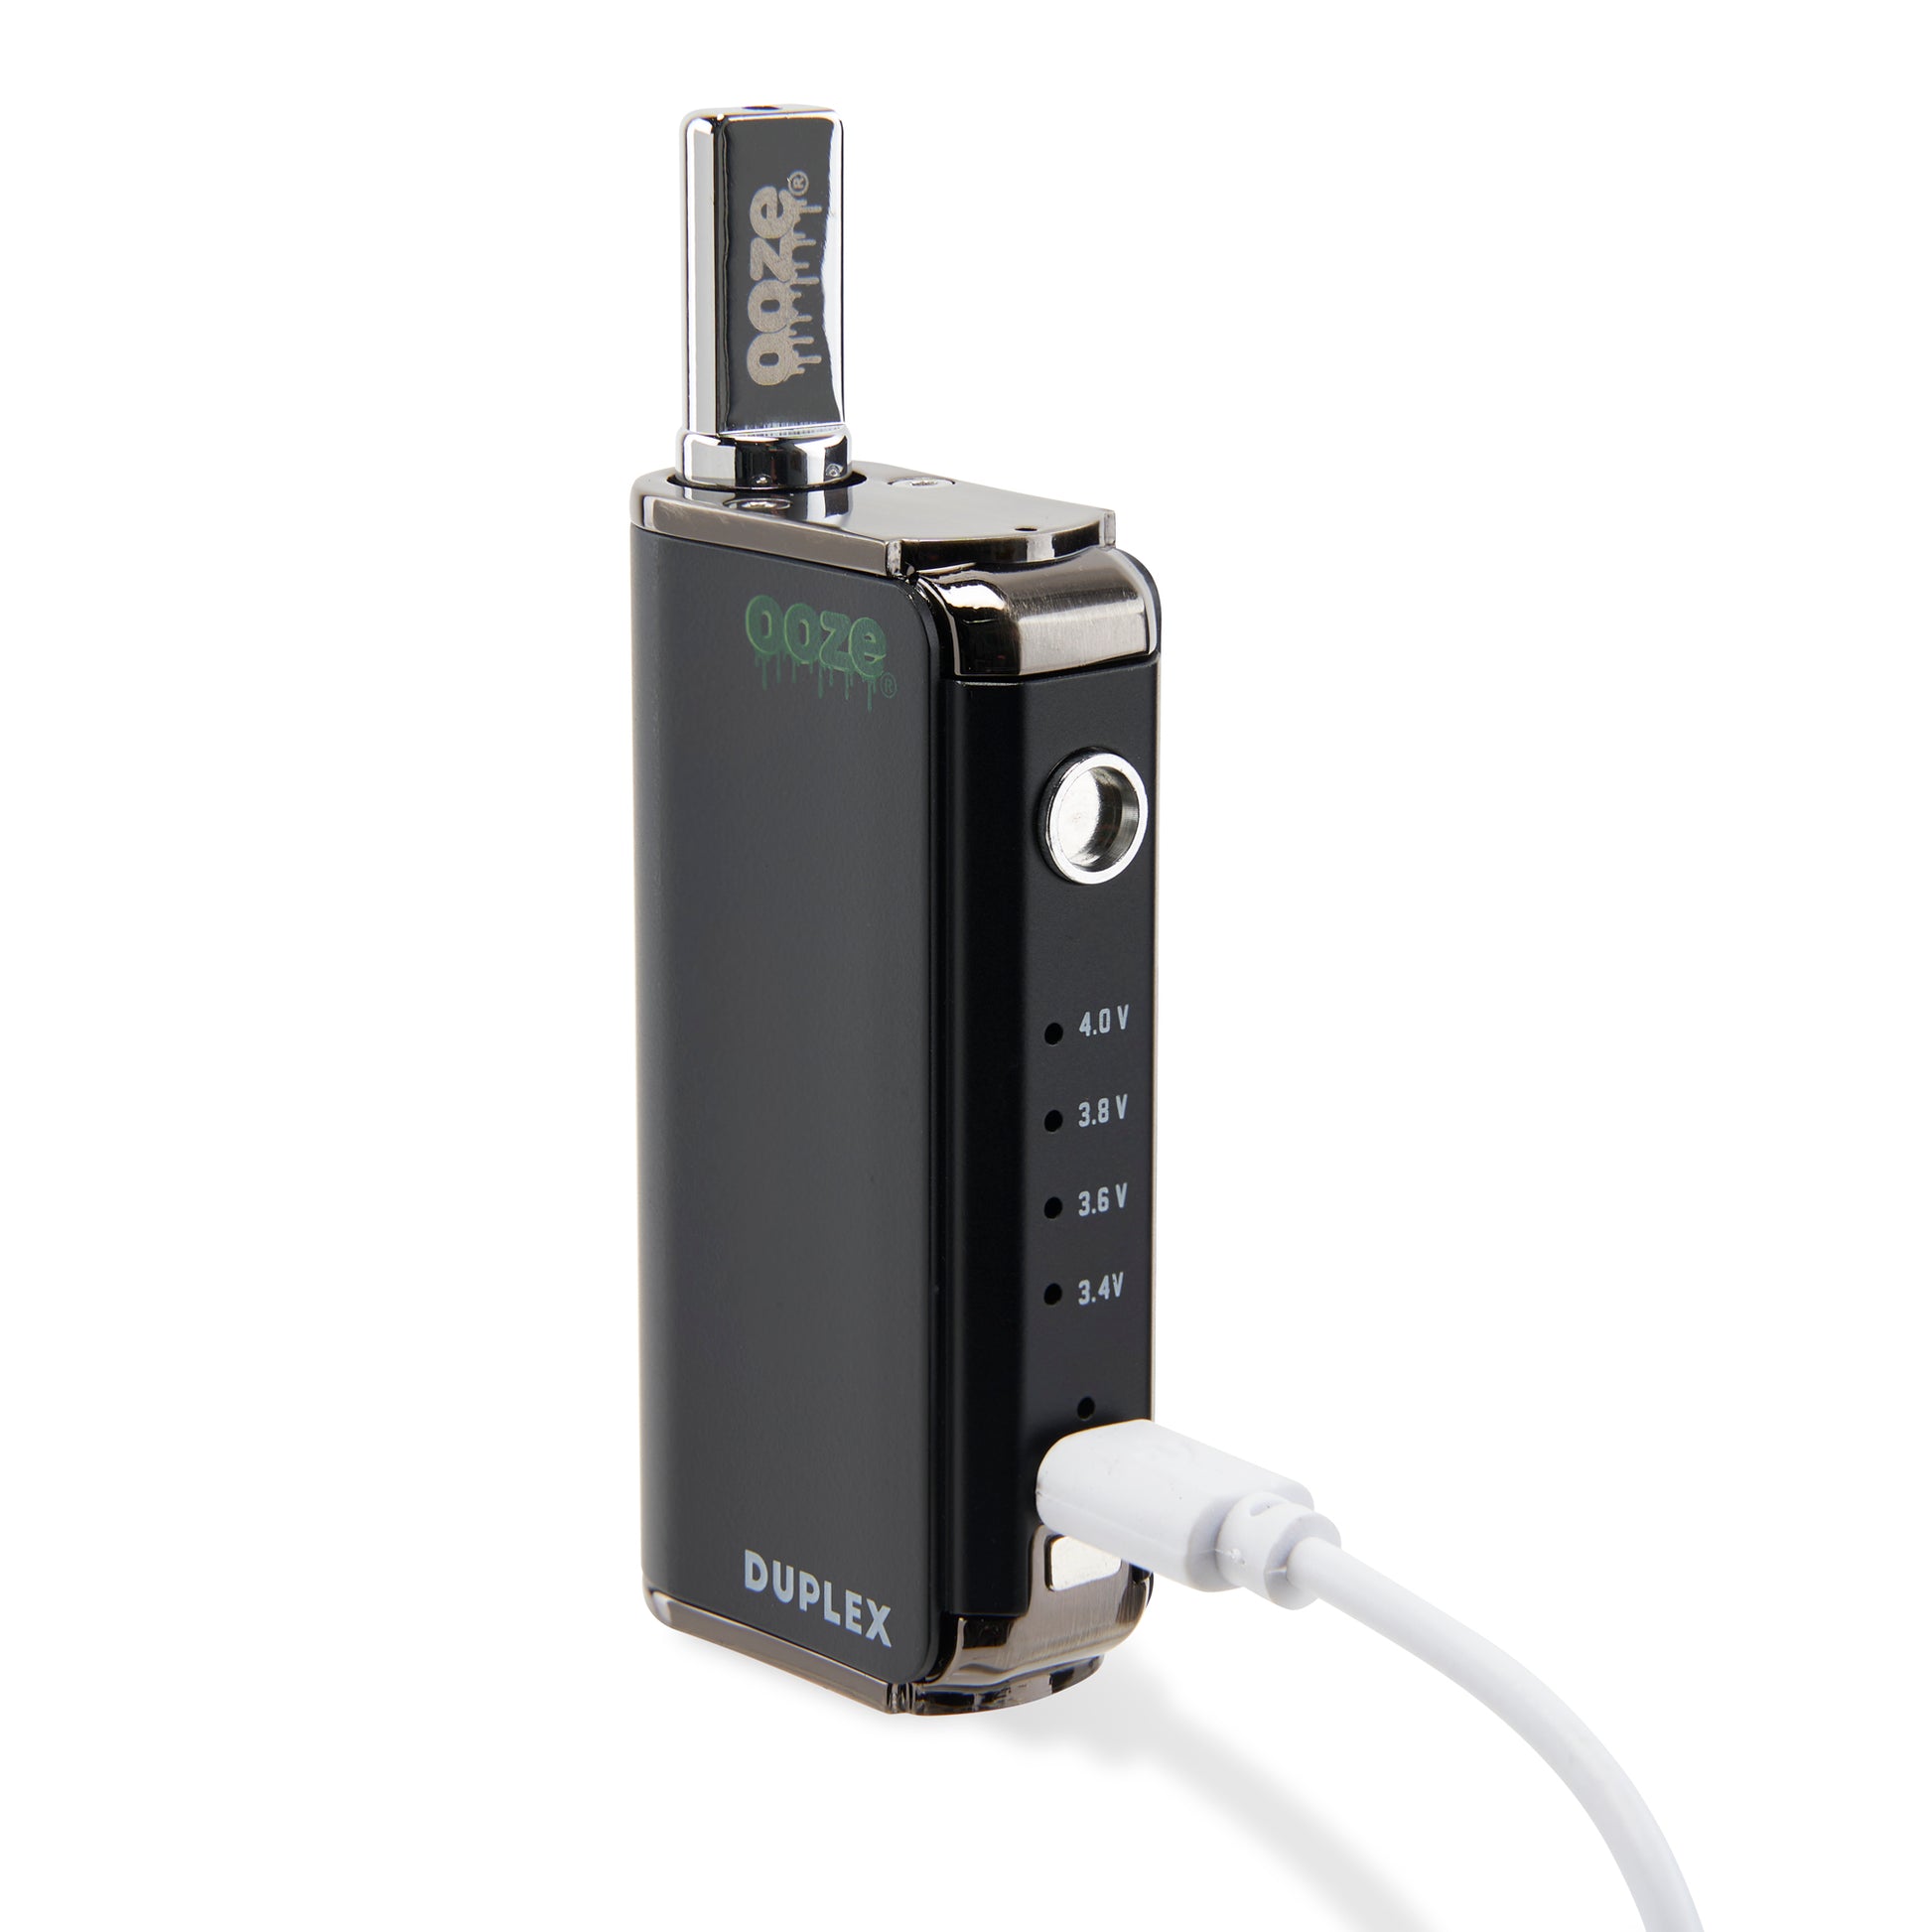 The Panther Black Ooze Duplex Pro Vaporizer is shown with the magnetic trigger button removed and the type-c charger plugged in.